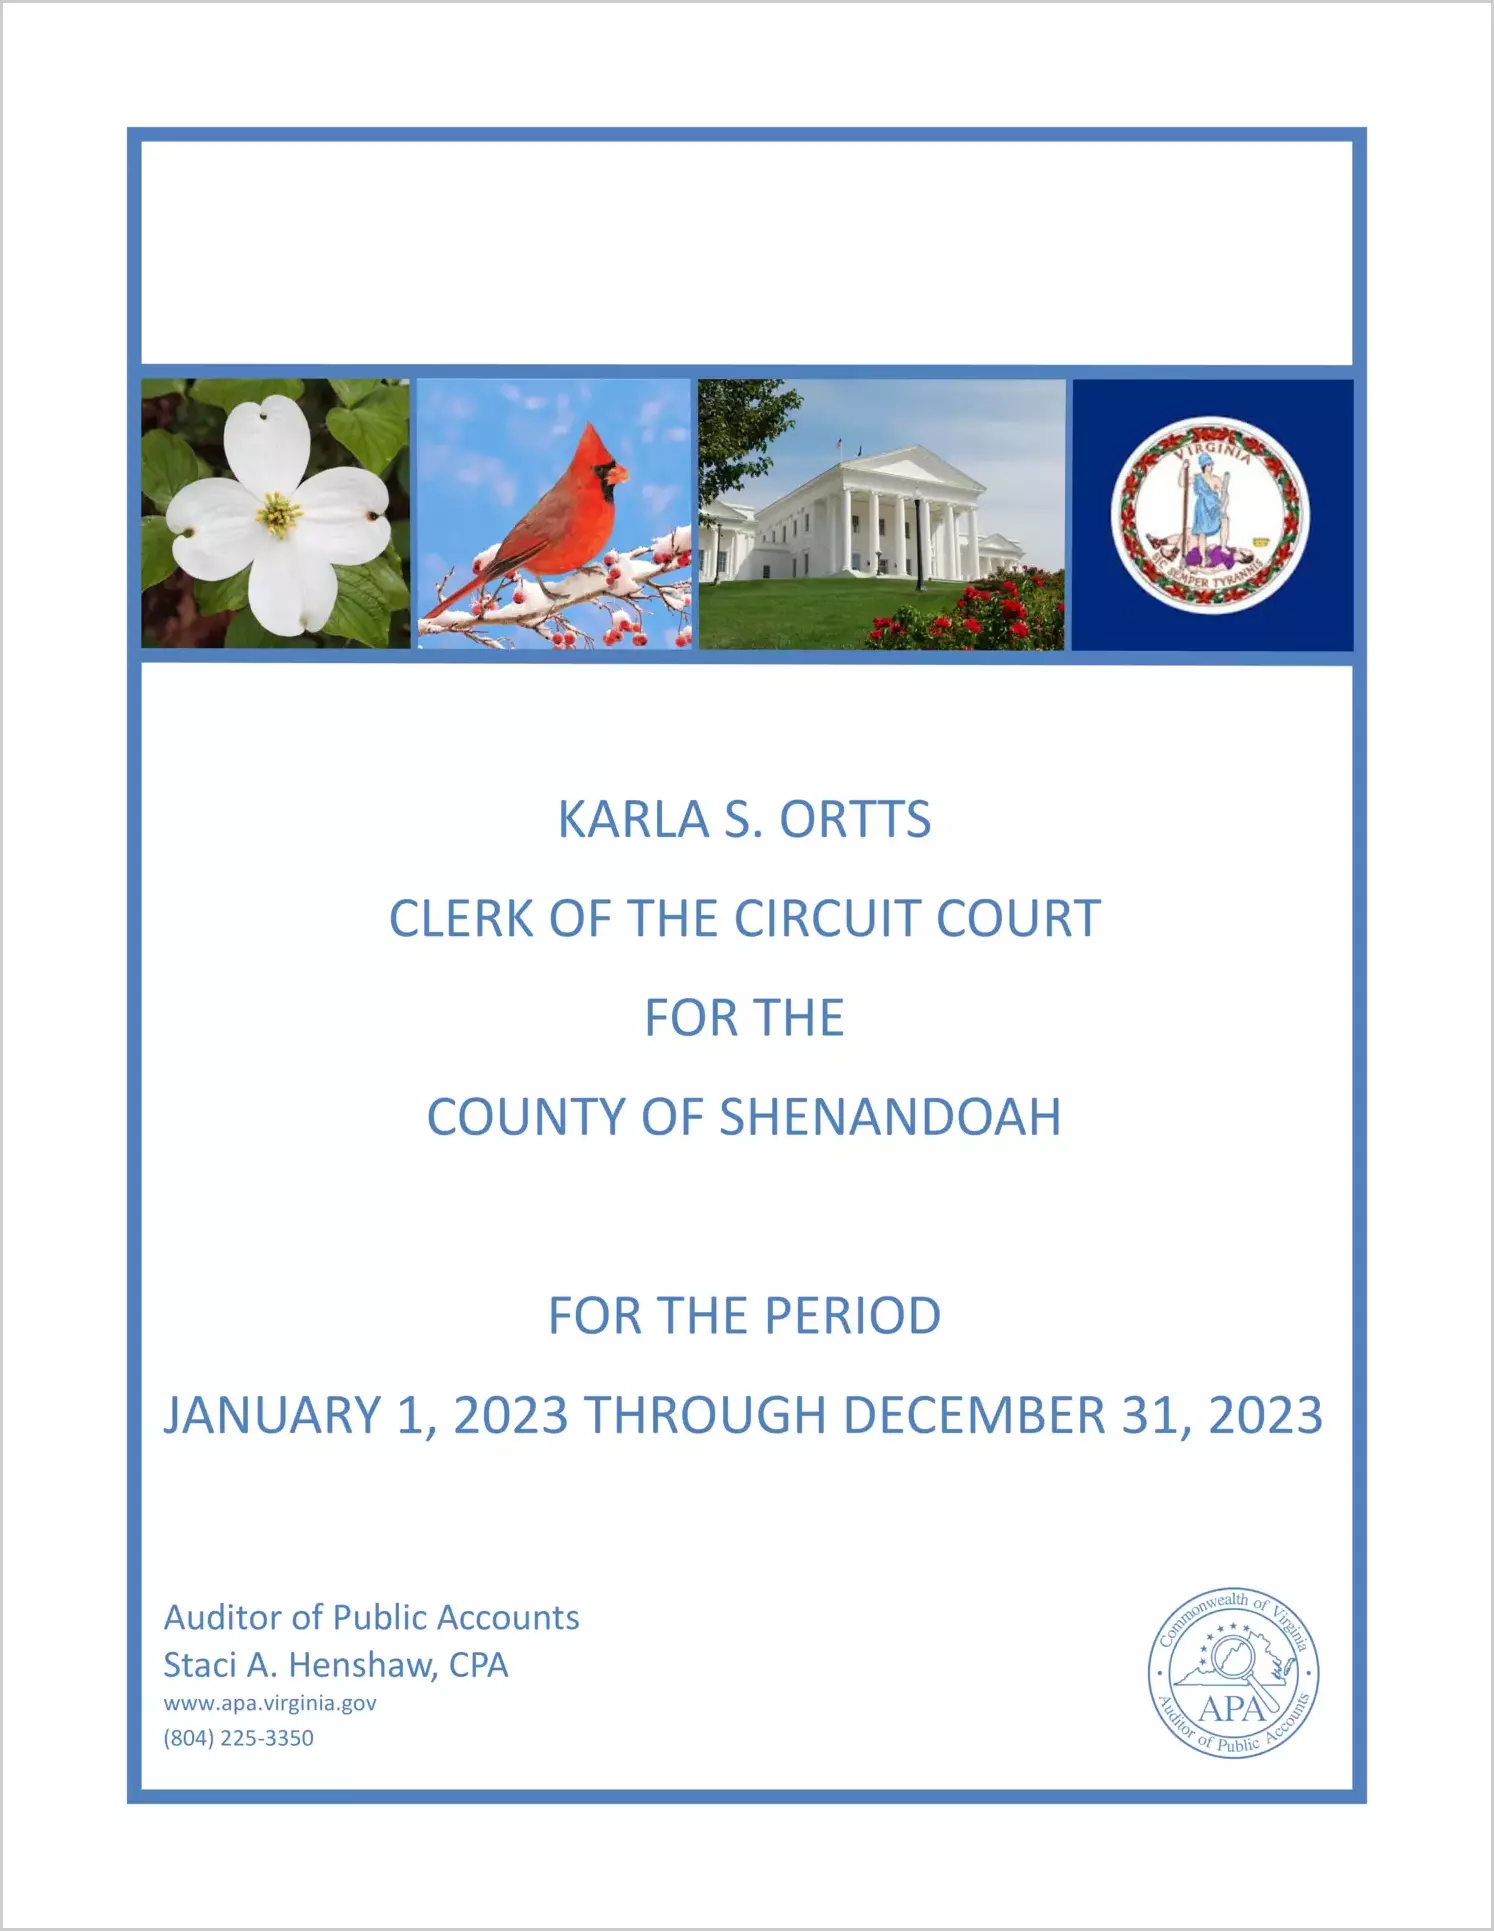 Clerk of the Circuit Court for the County of Shenandoah for the period January 1, 2023 through December 31, 2023